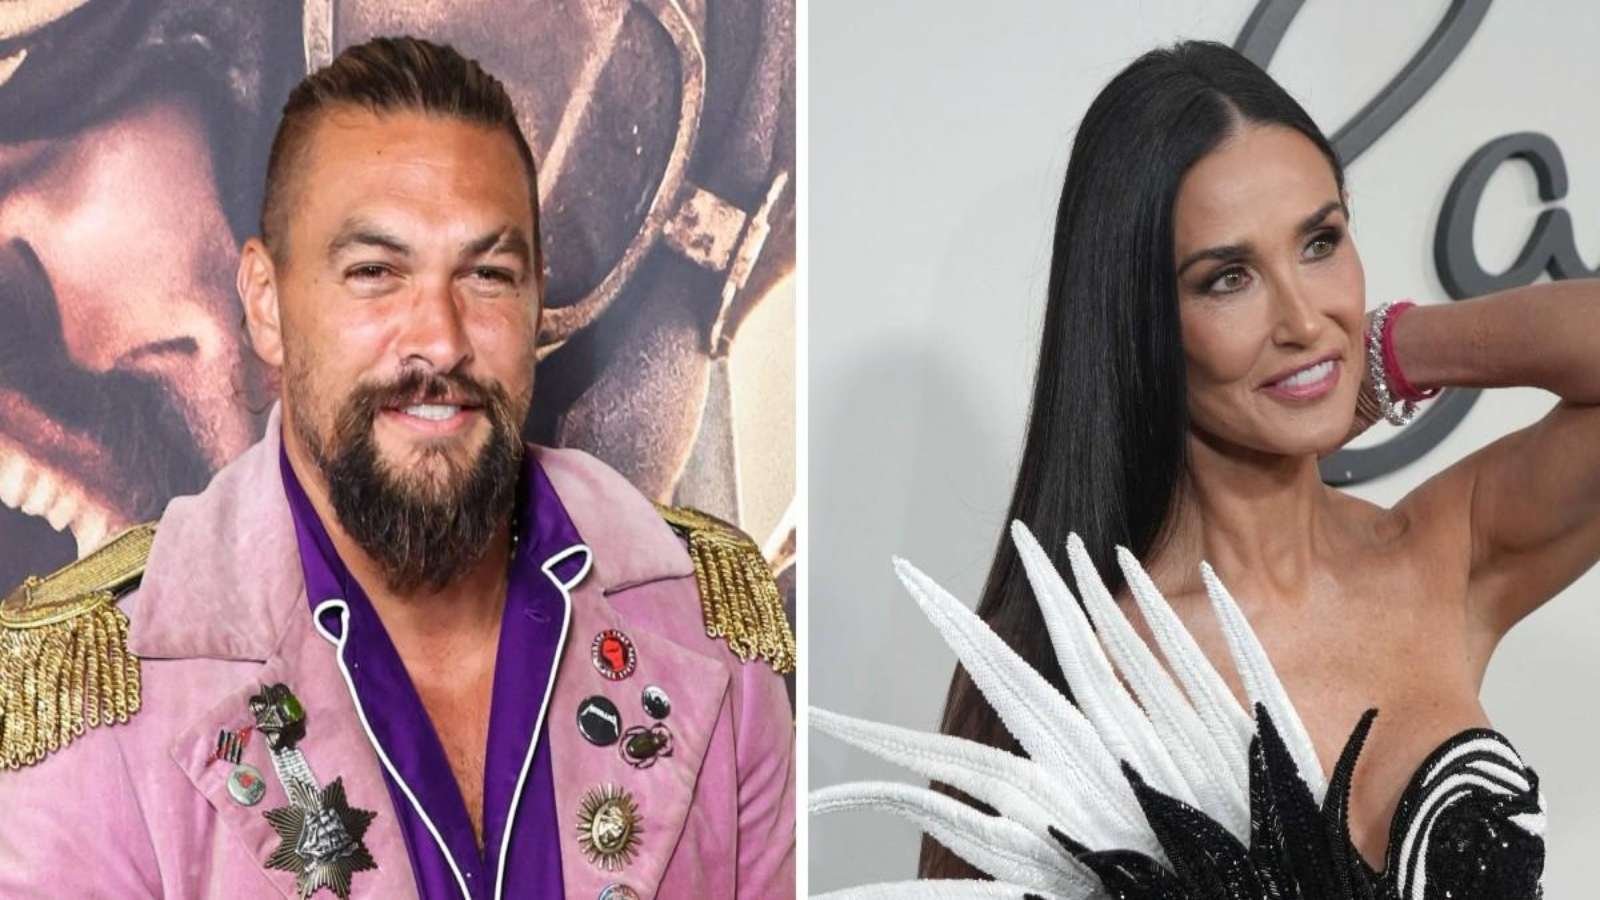 Jason Momoa Reportedly Has Secret Crush on Demi Moore and Seeks to Date Her